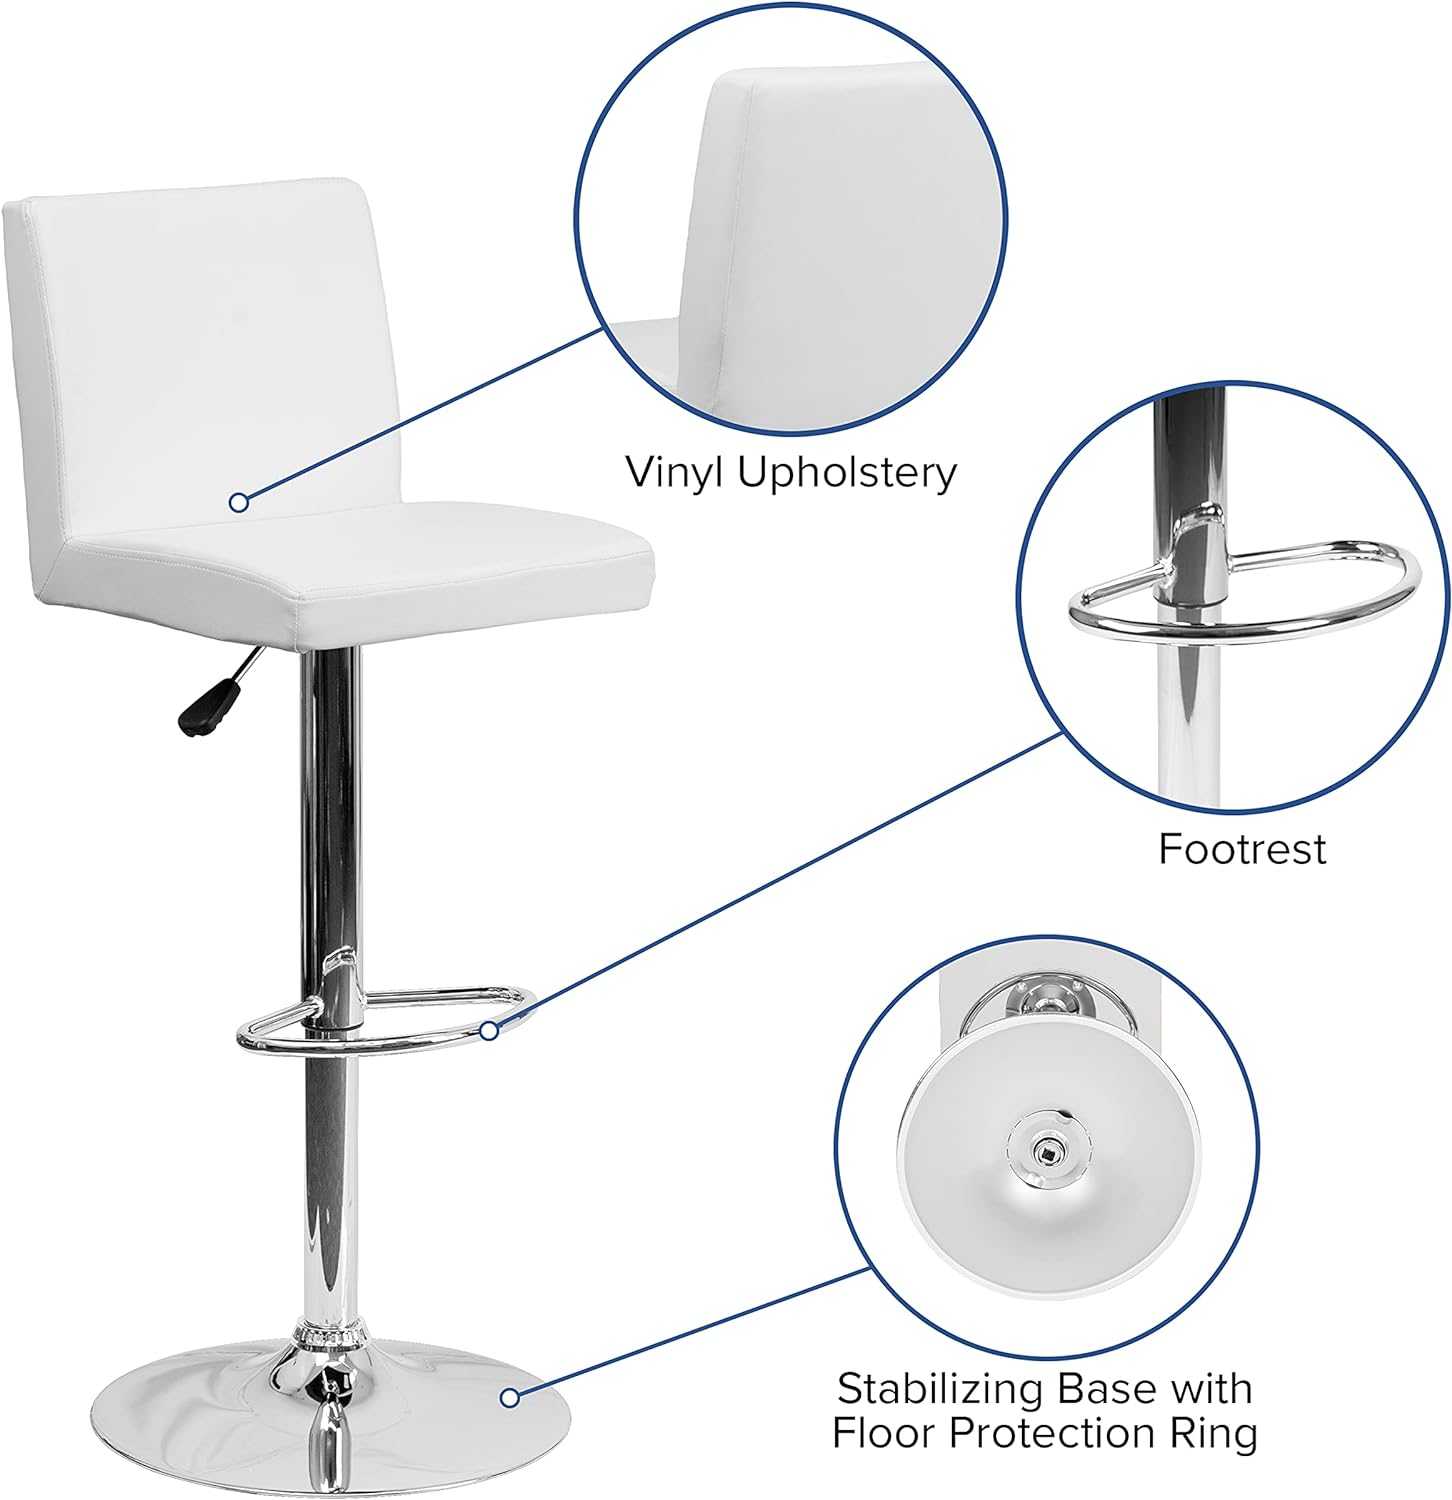 Flash Furniture White Contemporary Barstool, White - CH-92066-WH-GG